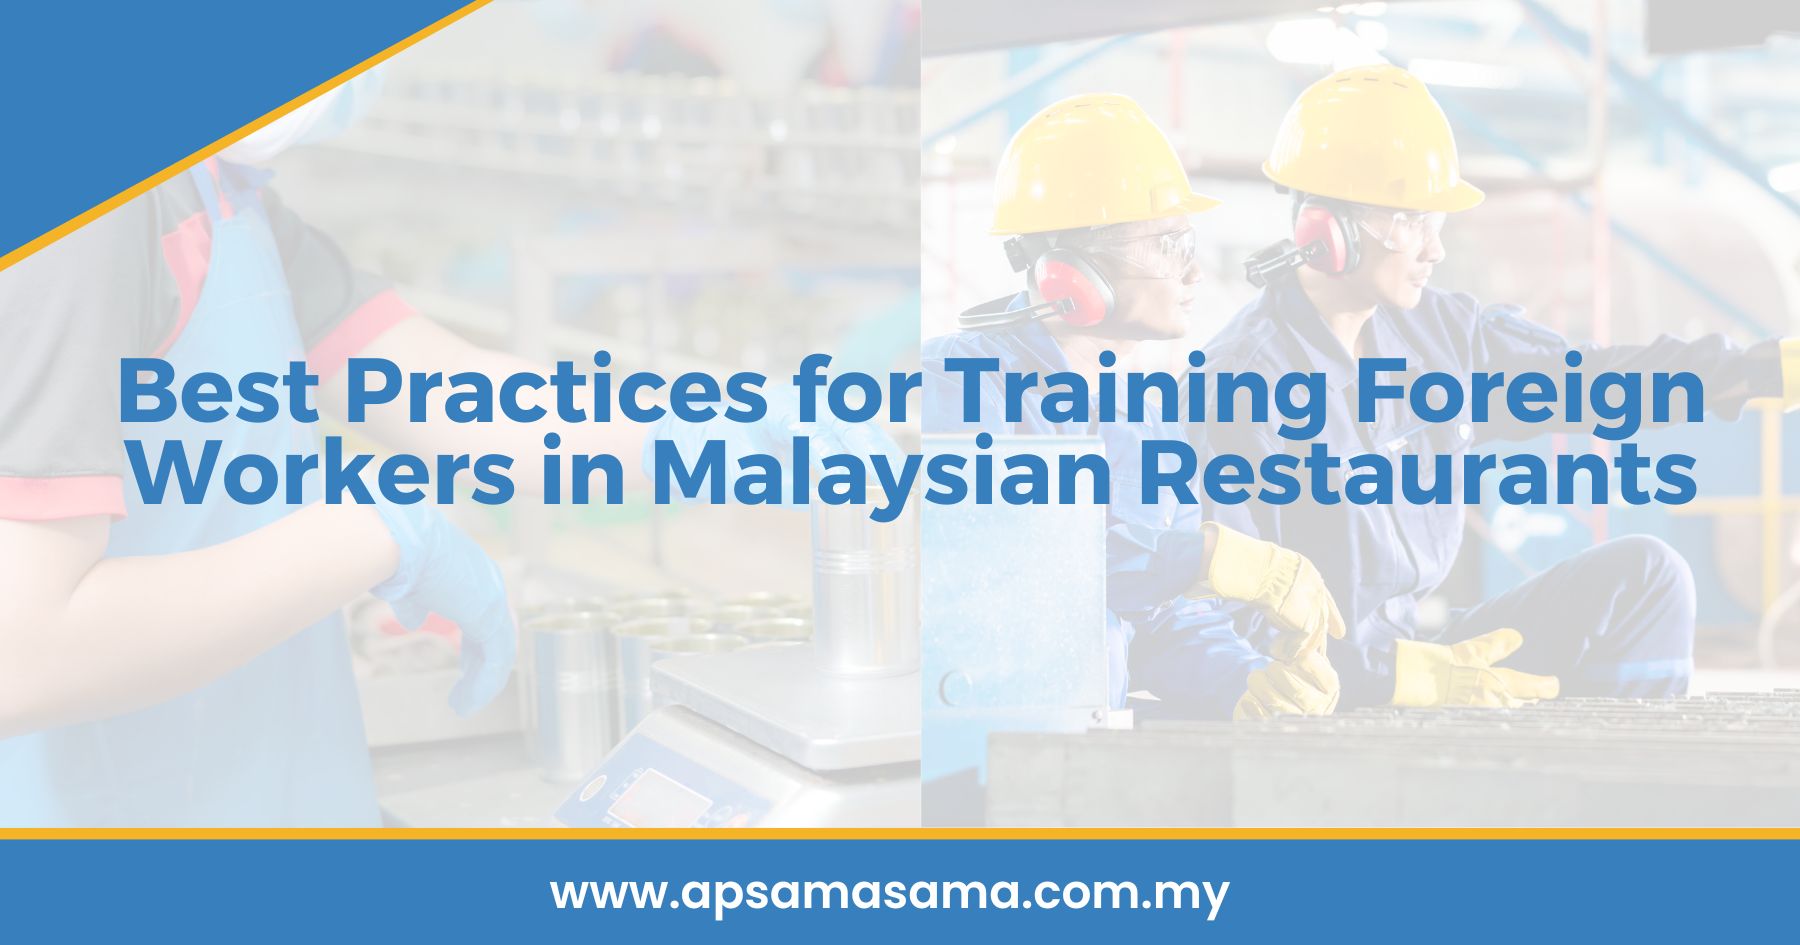 Best Practices for Training Foreign Workers in Malaysian Restaurants